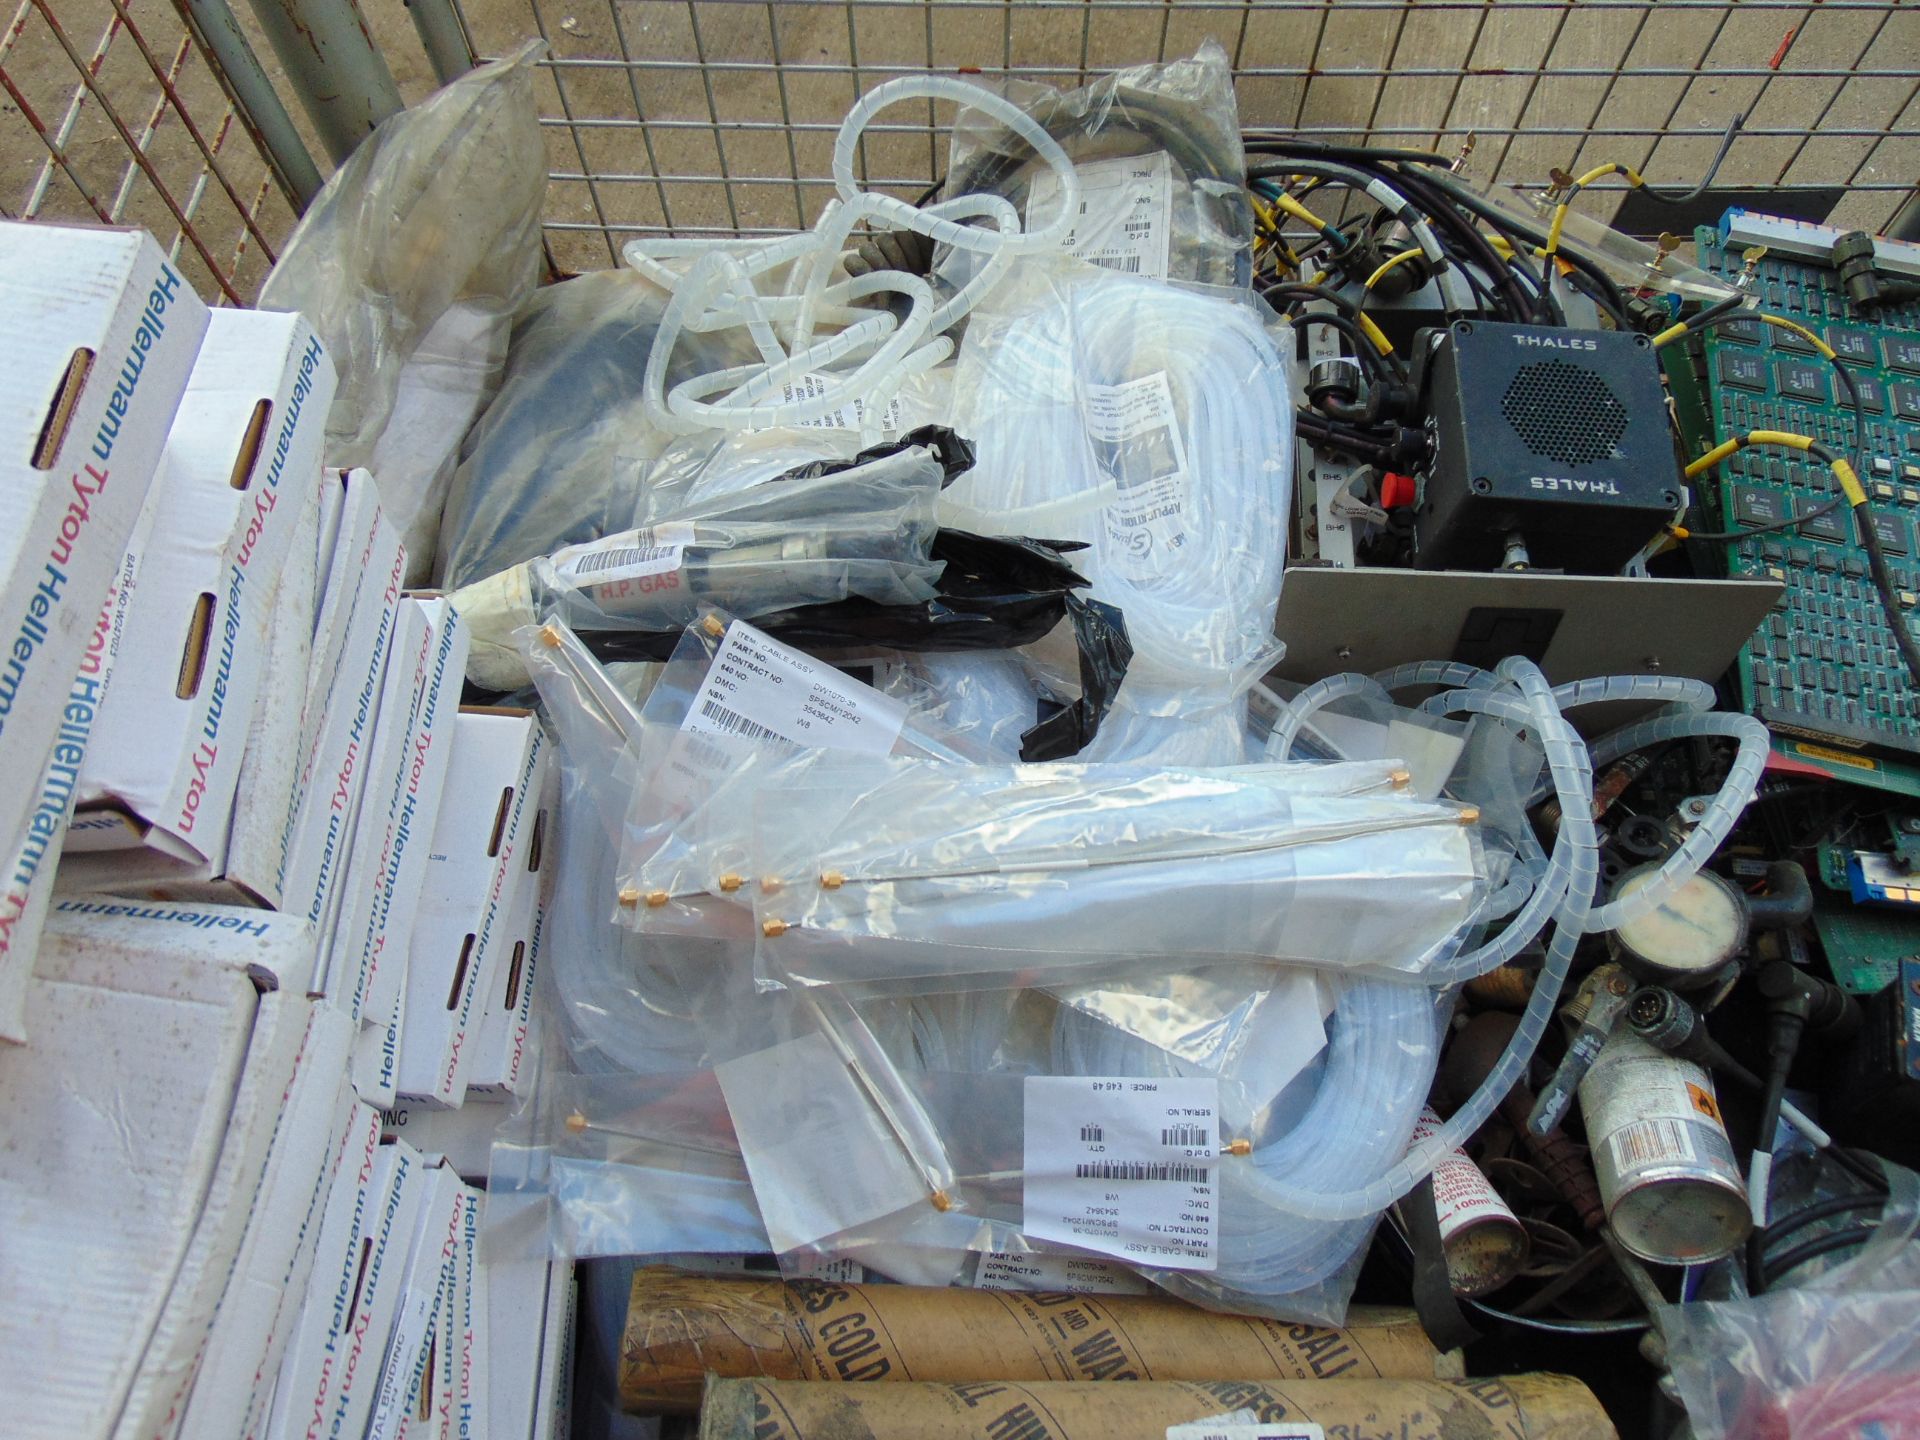 1 x Stillage Electrical Spares, Cables, PCB's etc - Image 3 of 9